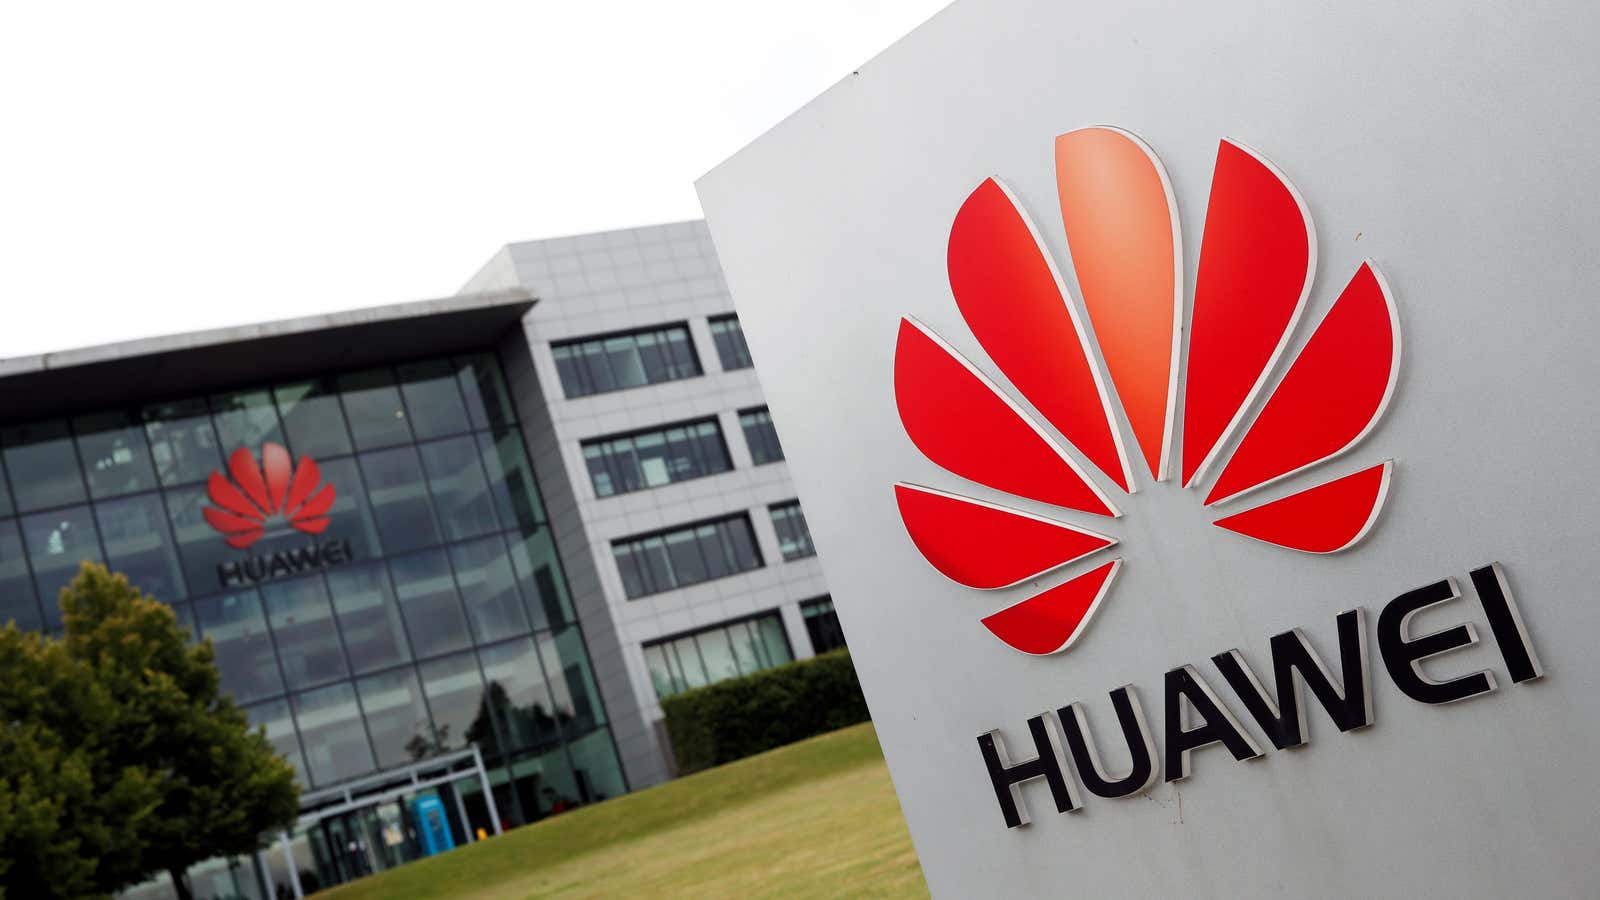 Huawei has invested massively in the UK. It has a lot to lose.